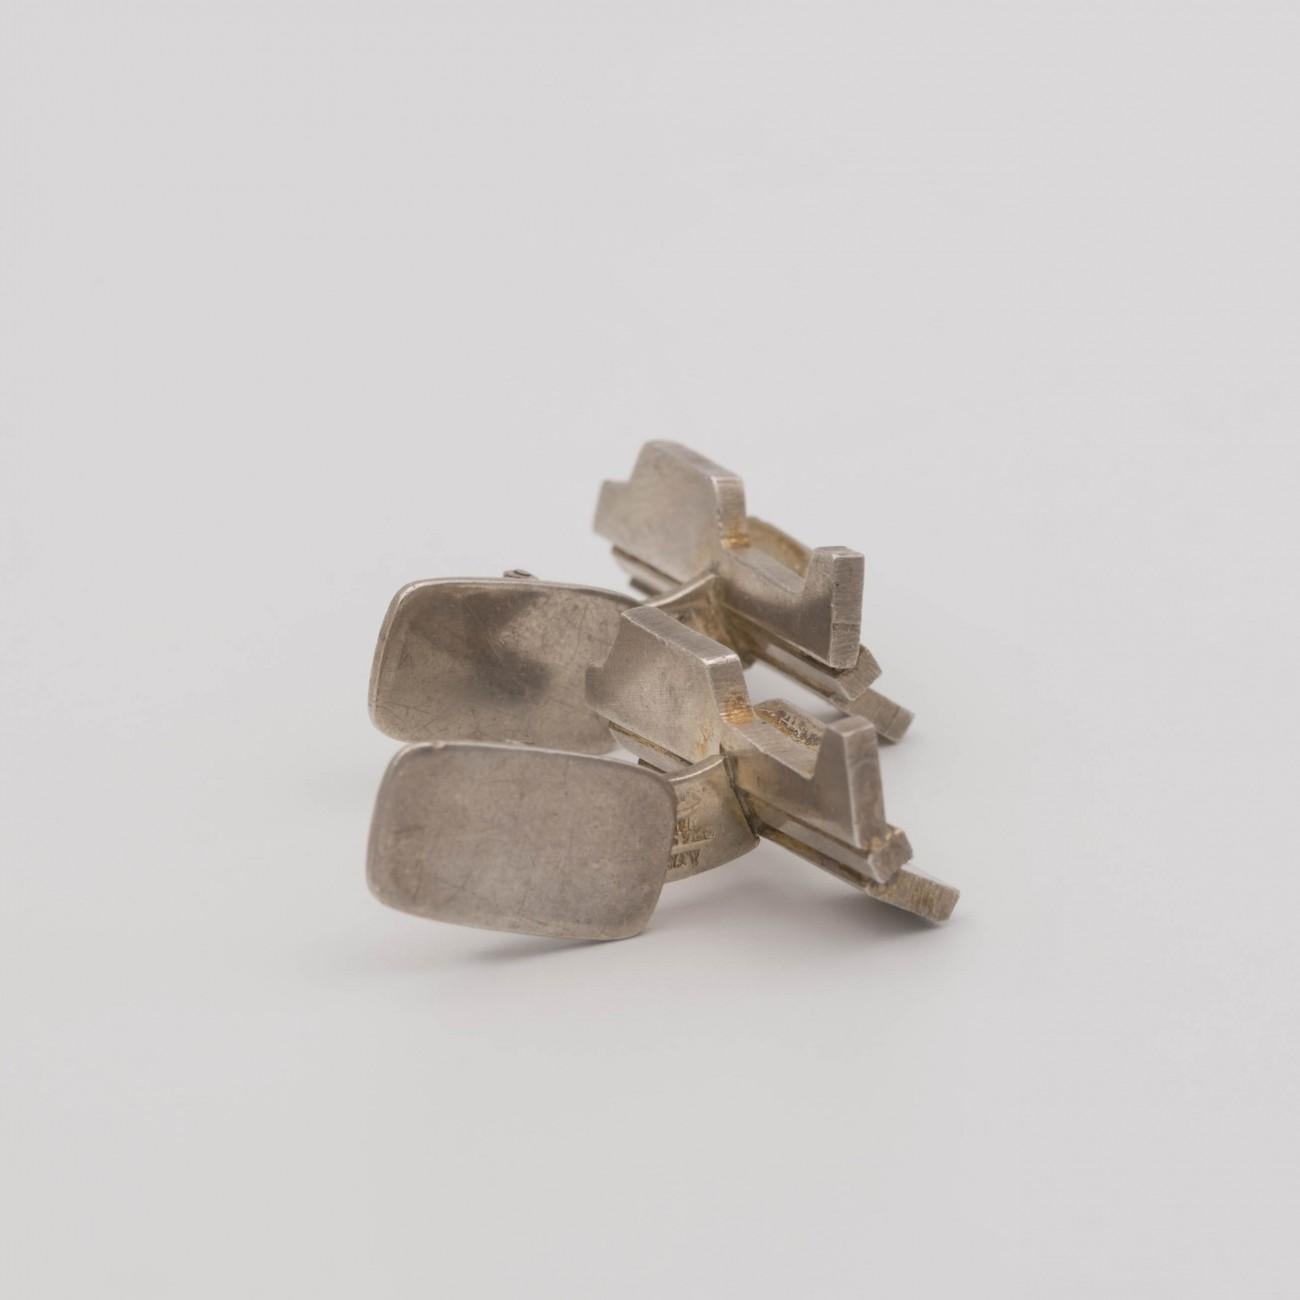 Late 20th Century Silver Sculptural Modernist Silver Cufflinks by Rey Urban for Age Fausing, 1972